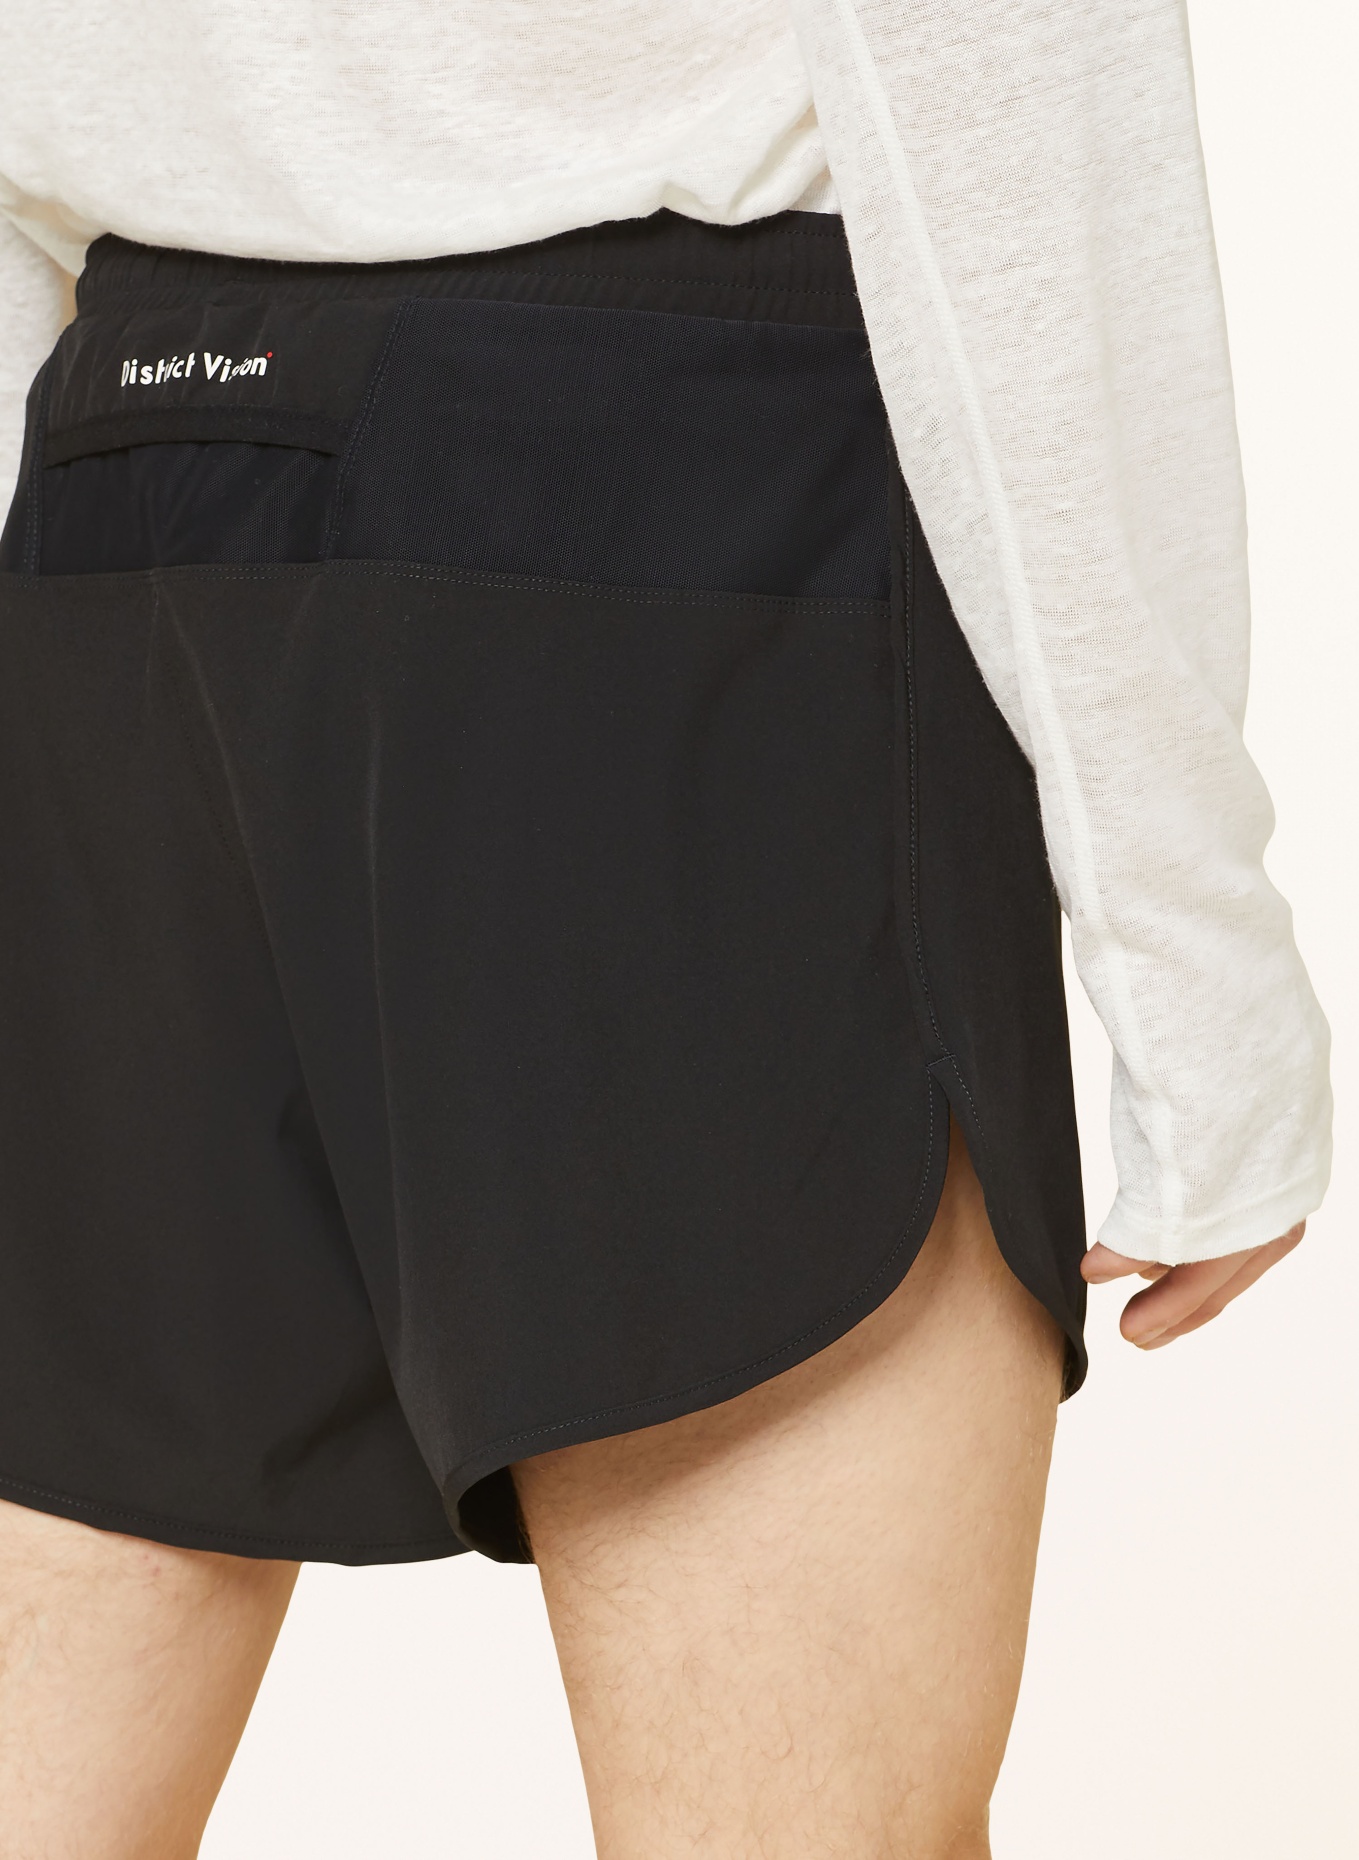 District Vision 2-in-1 running shorts, Color: BLACK (Image 6)